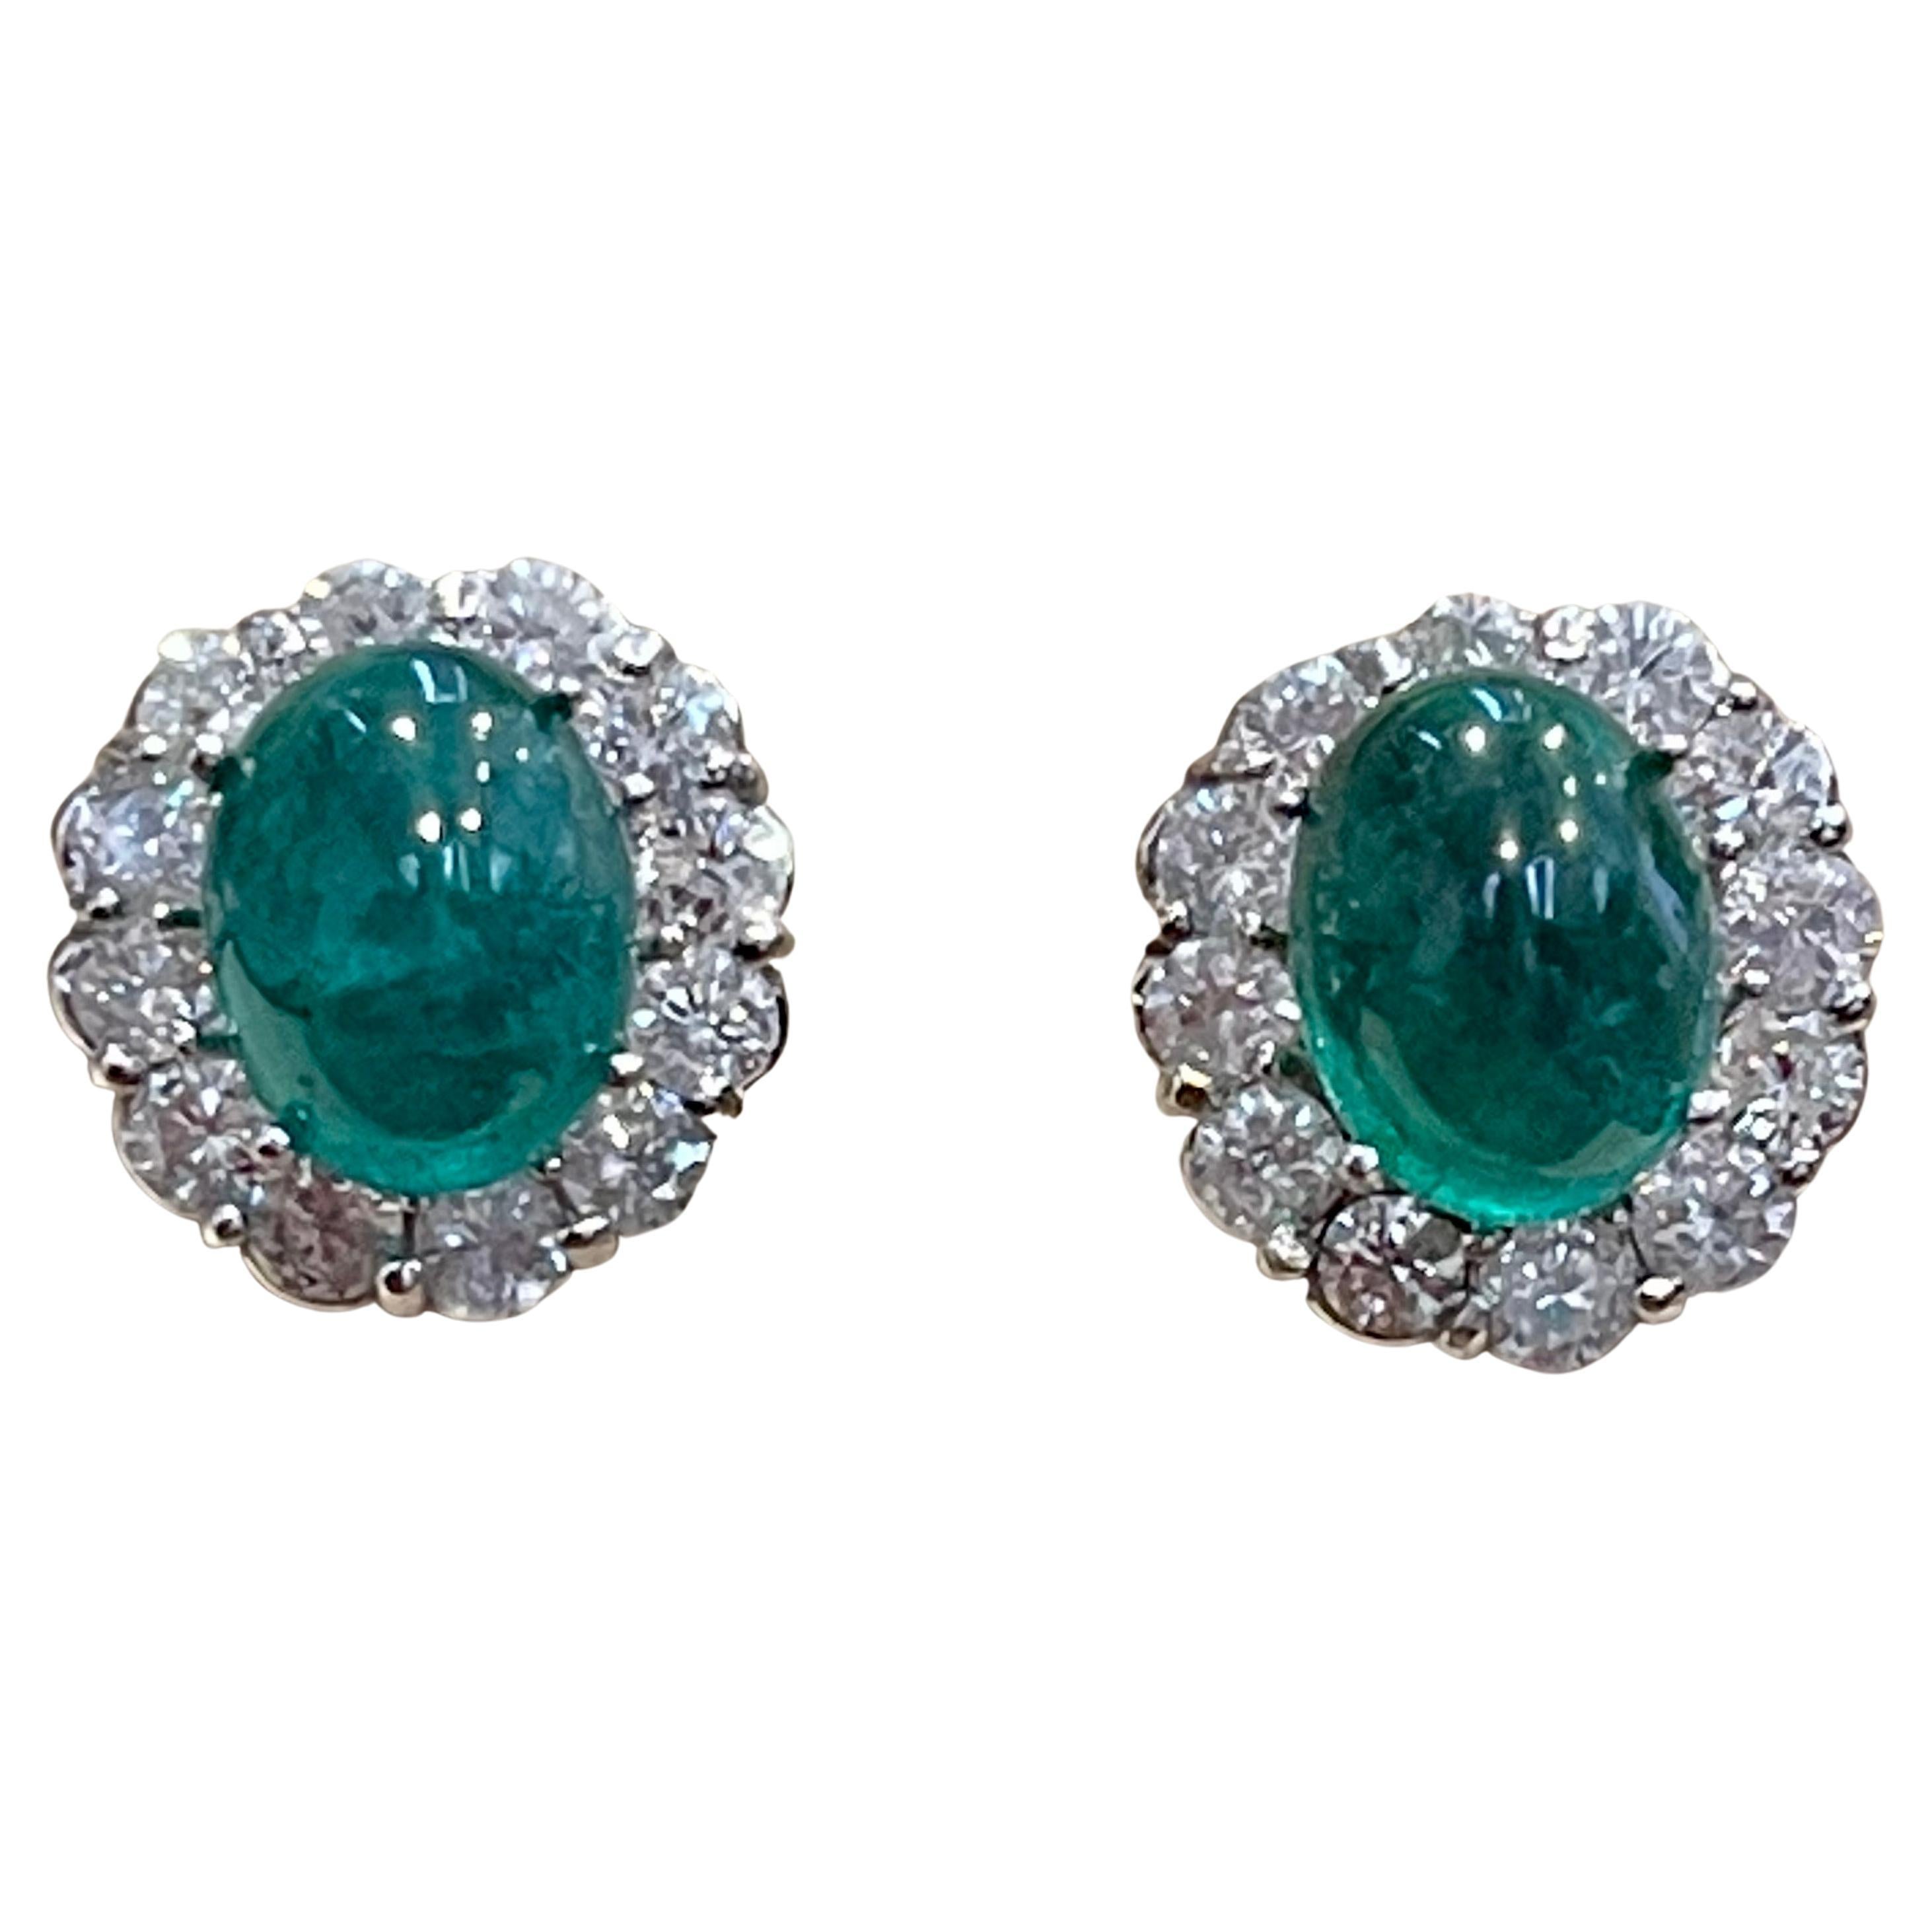 12 Ct Natural Emerald Zambia Cabochon & 4 Ct Diamond Stud Earring 14 KW Gold For Sale